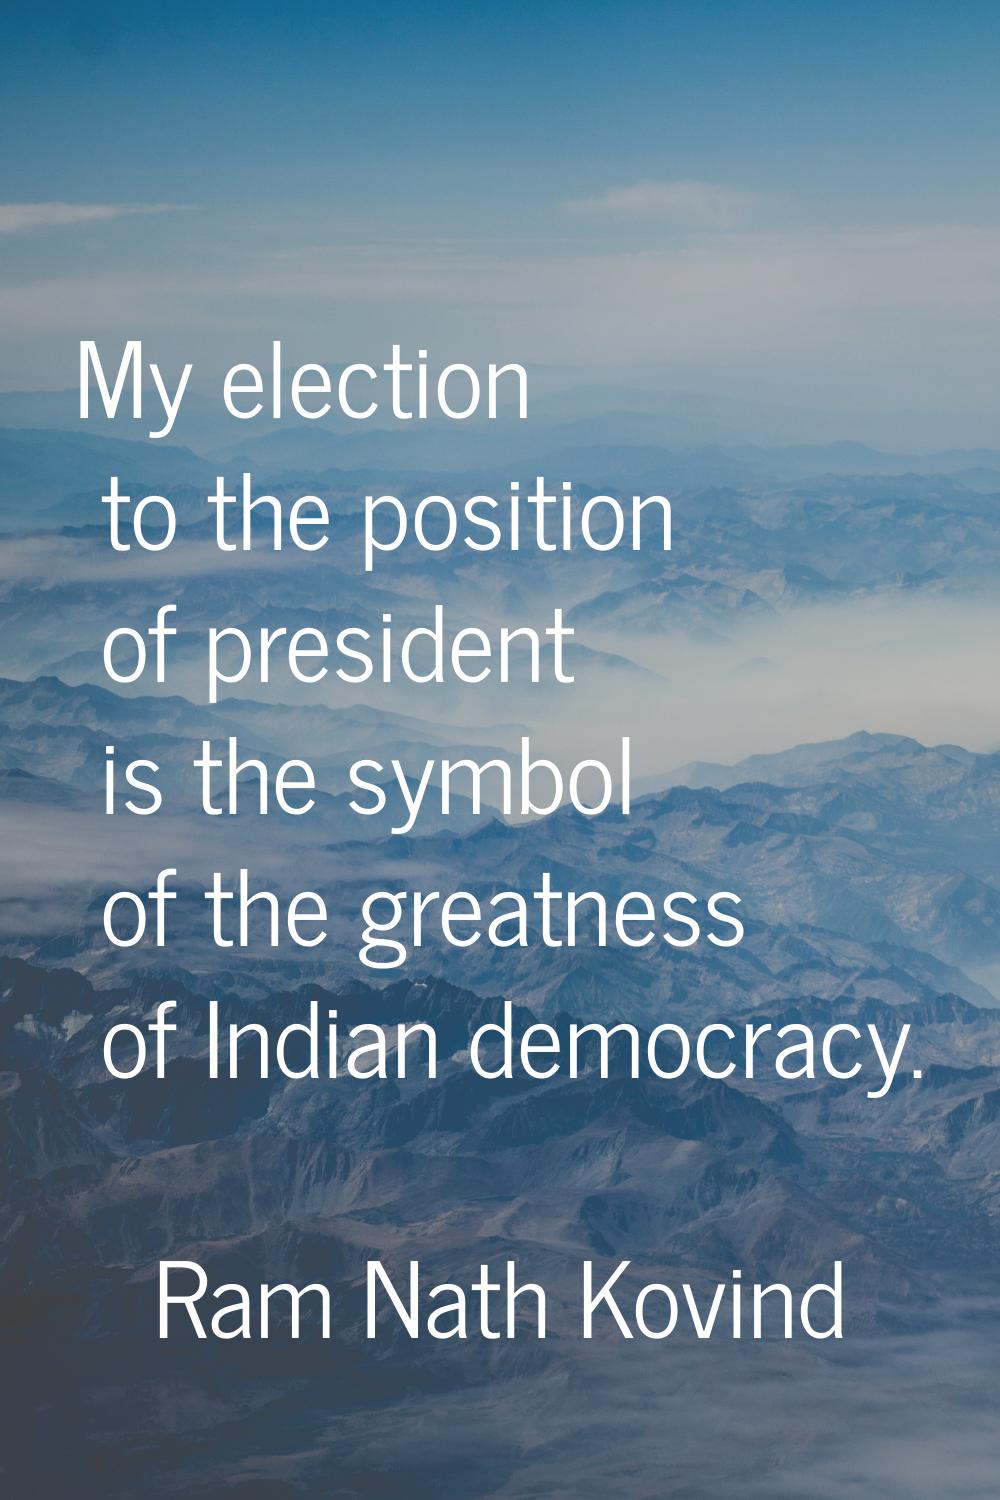 My election to the position of president is the symbol of the greatness of Indian democracy.